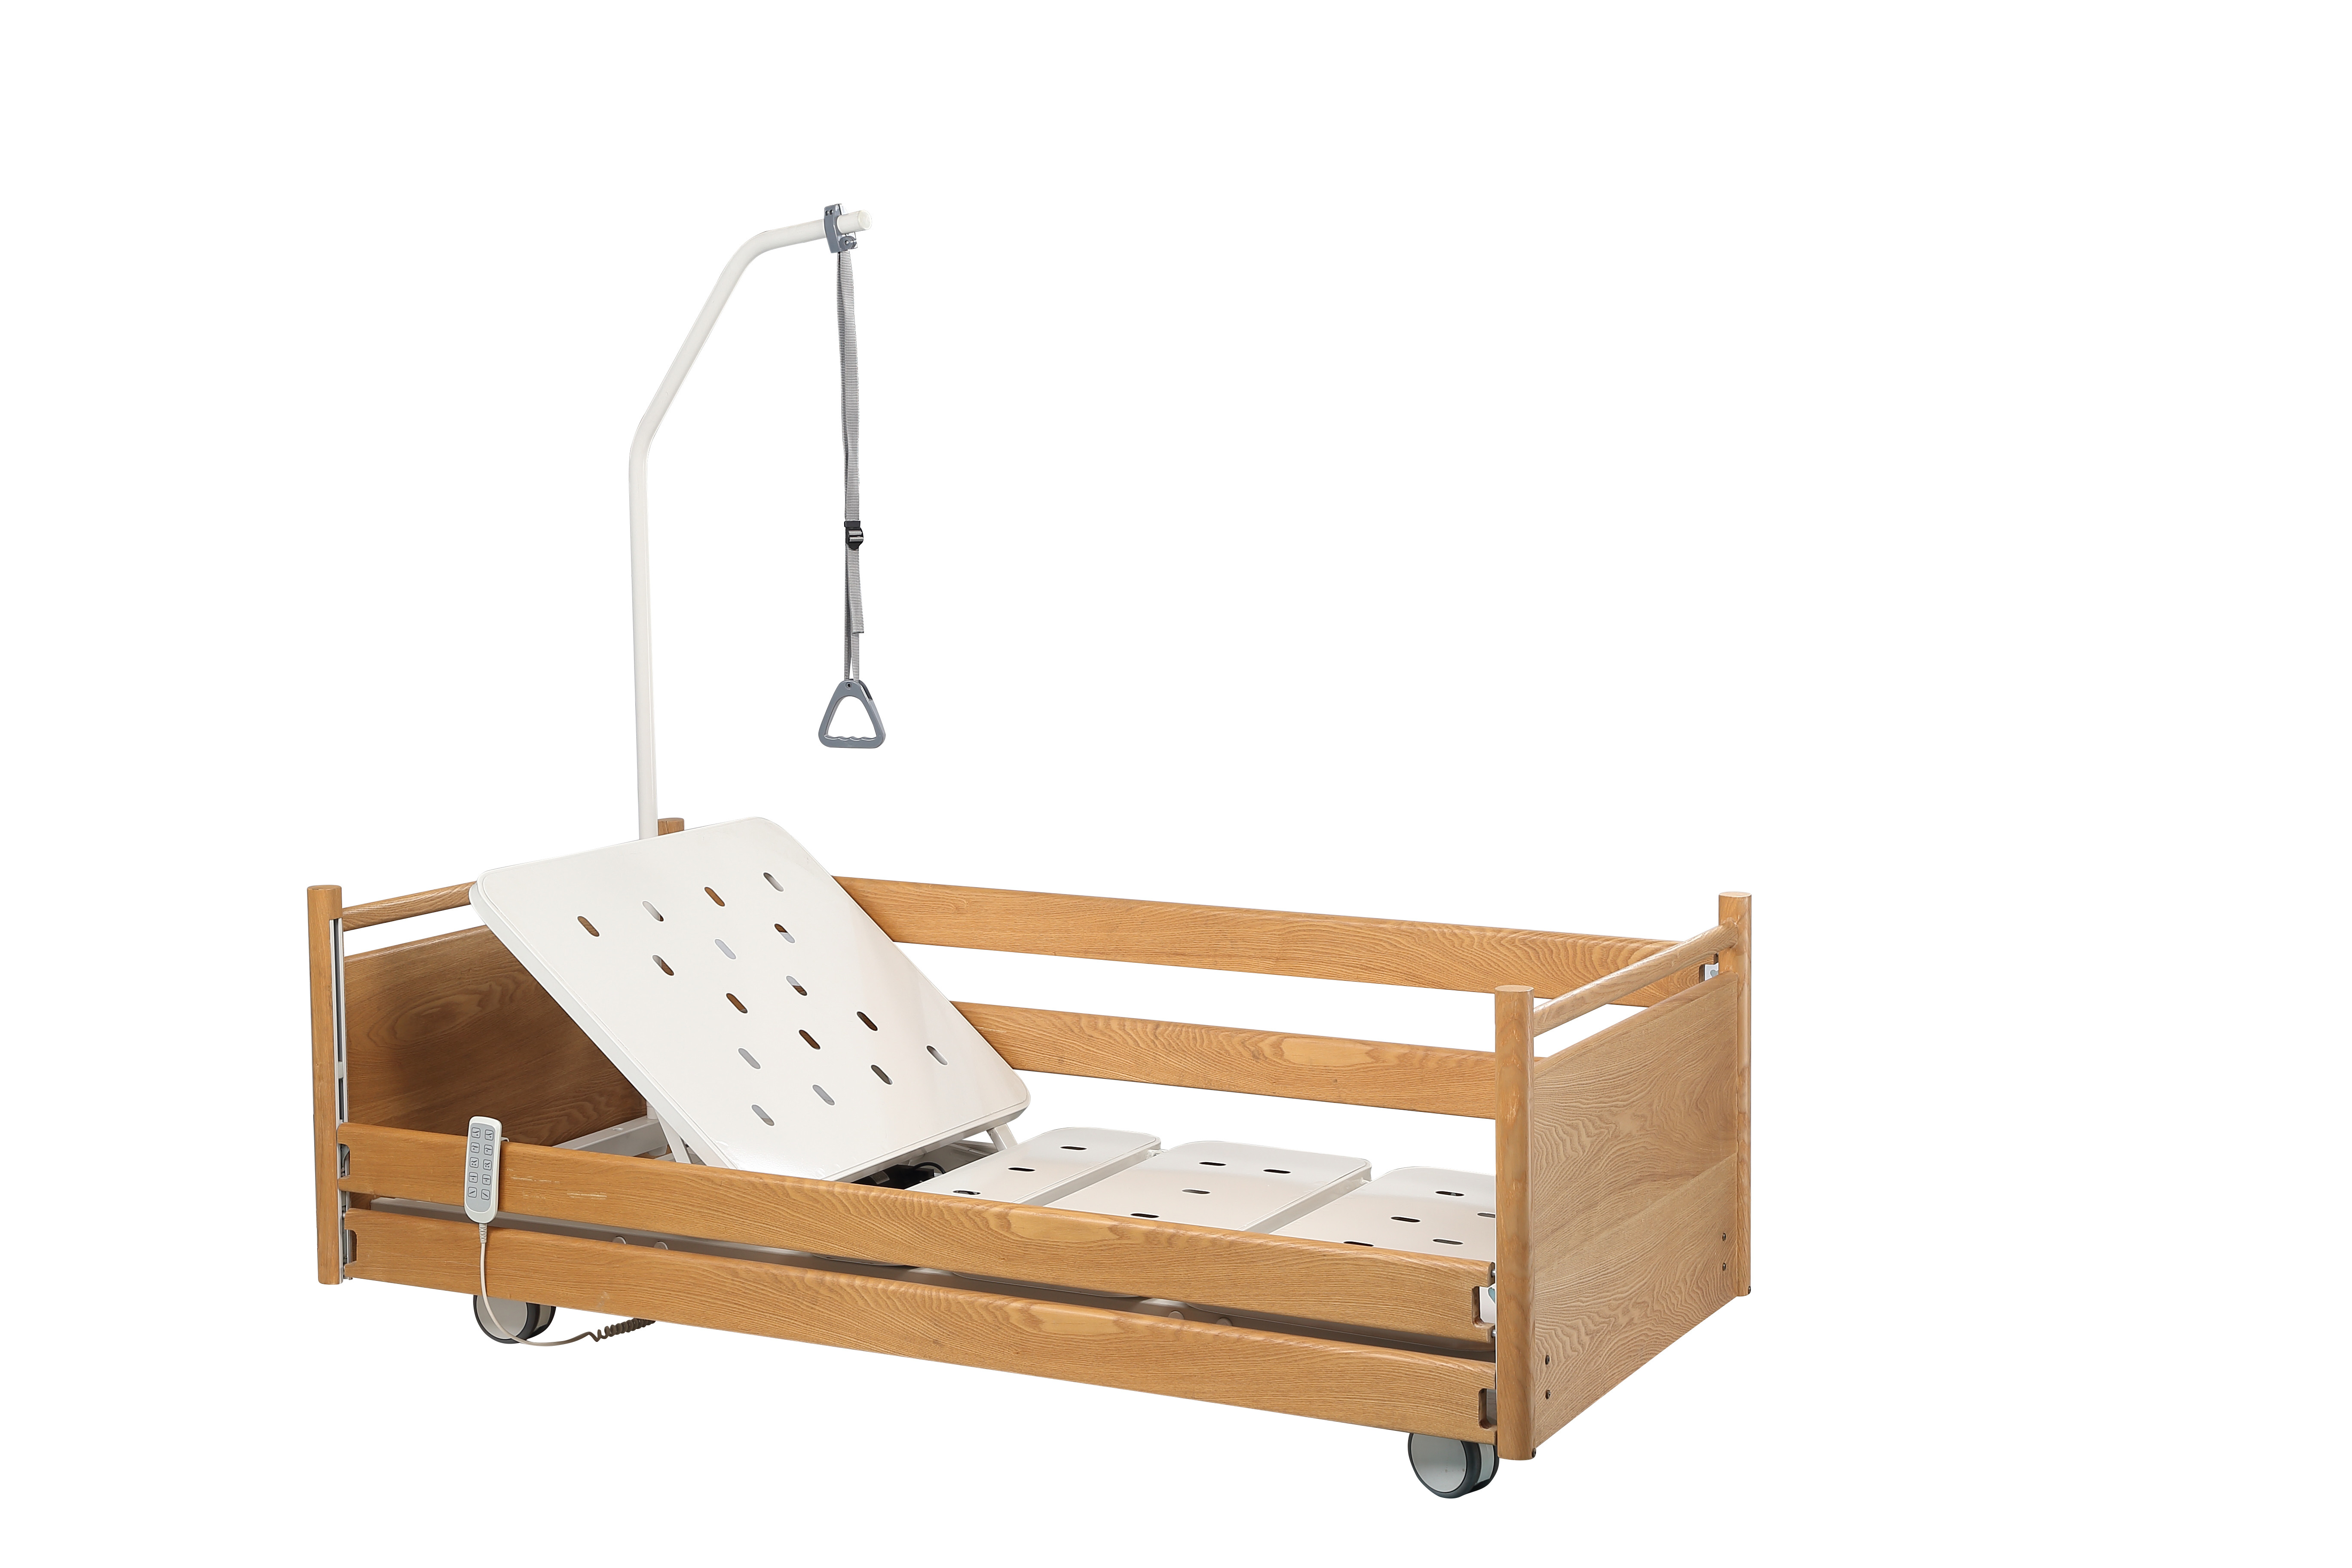 2190 * 970 * 300 - 760mm Home Care Bed For Paralysis Patient Wooden Handrails